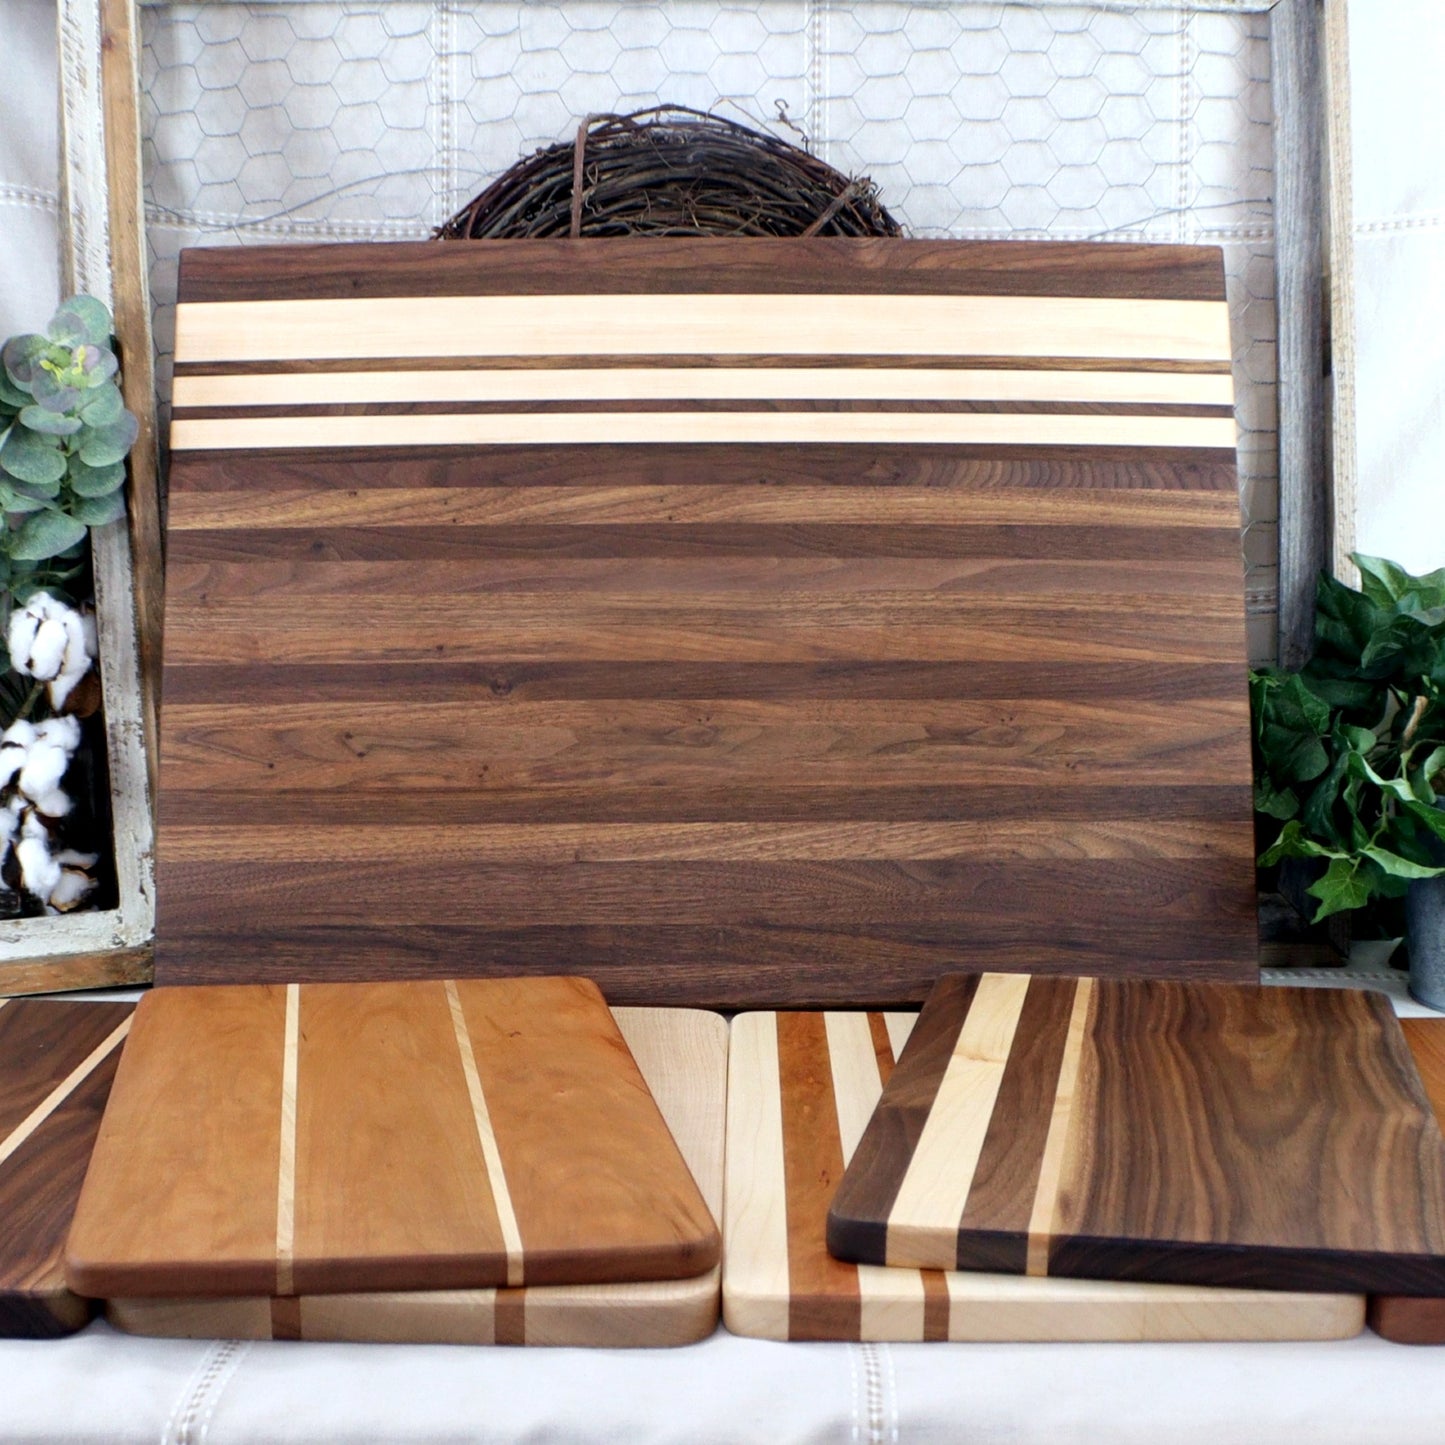 Extra-Large Edge-Grain Walnut & Maple End-Grain Cutting Board For Tabletop or Counter